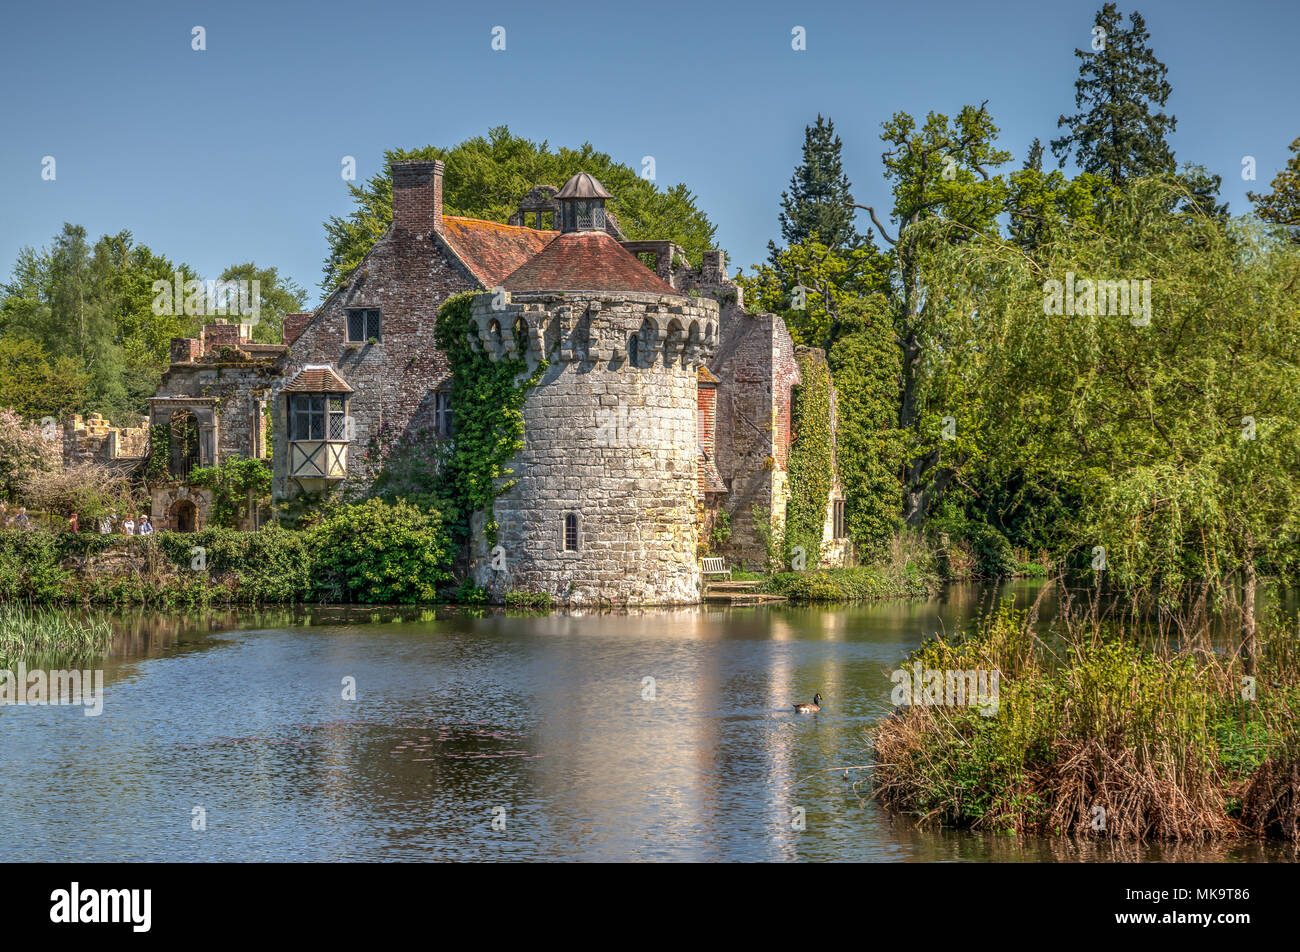 Scotney Castle and tower High Dynamic Range image Stock Photo